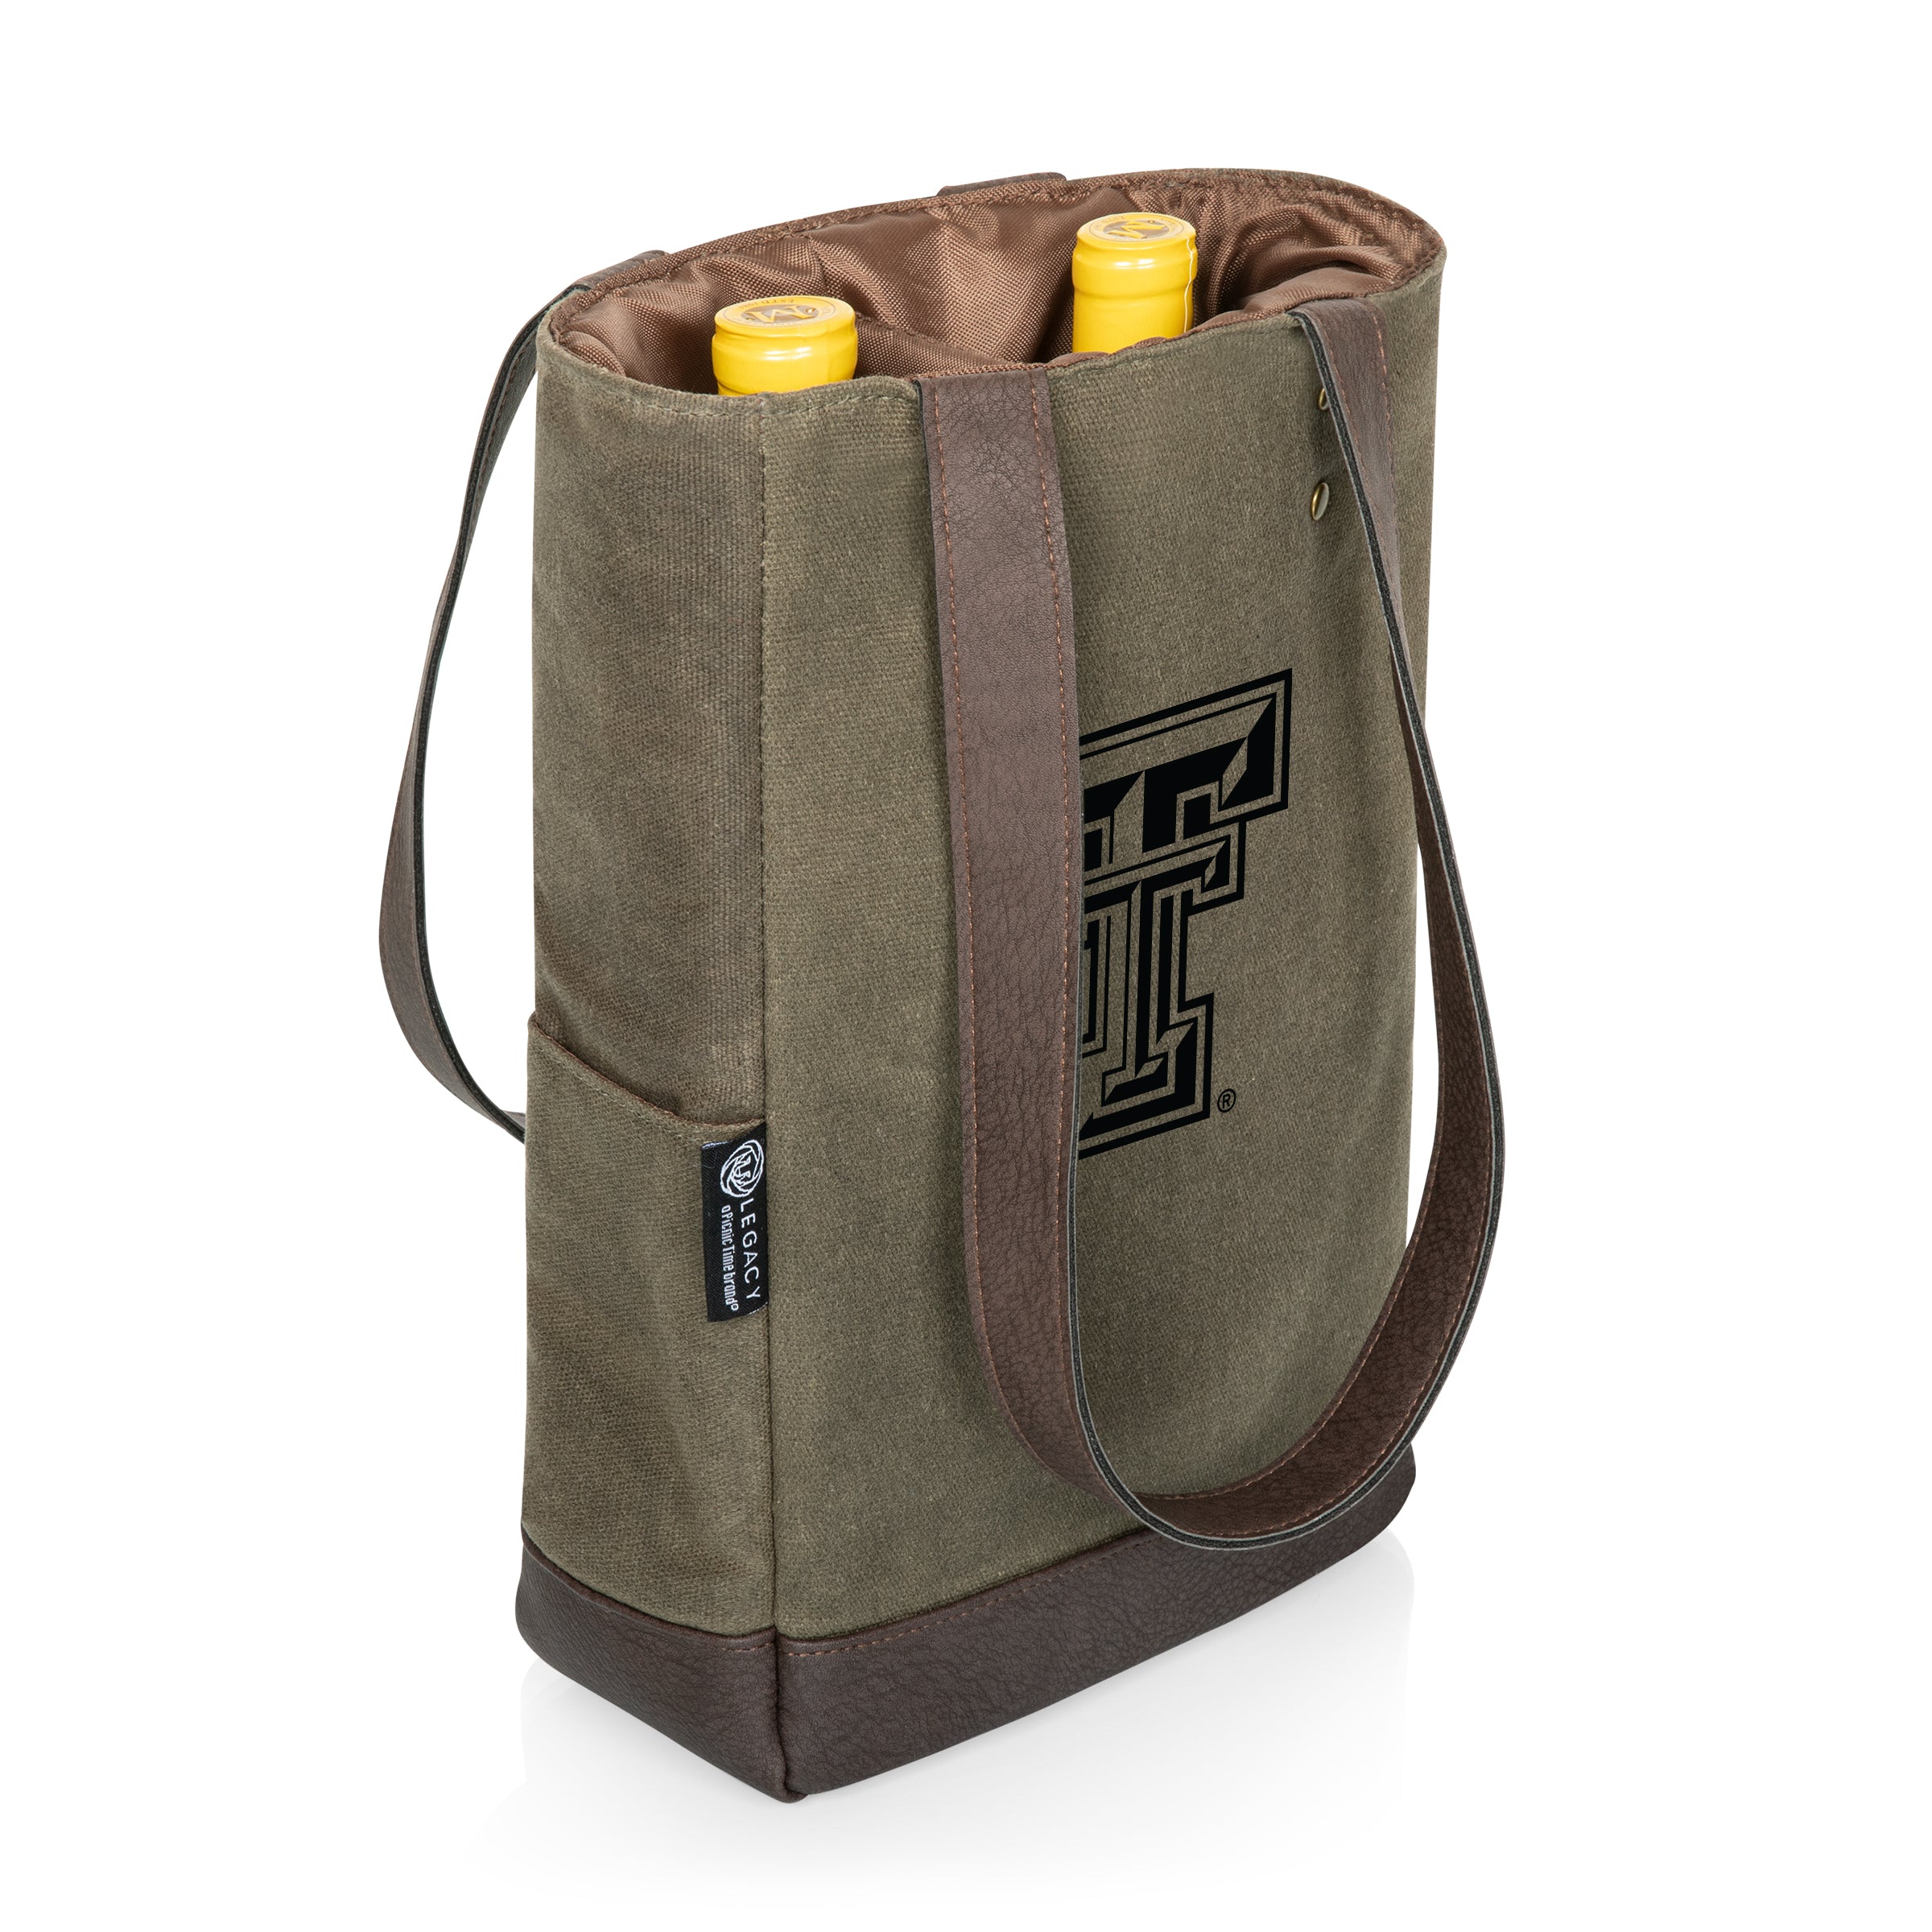 Texas Tech Red Raiders - 2 Bottle Insulated Wine Cooler Bag